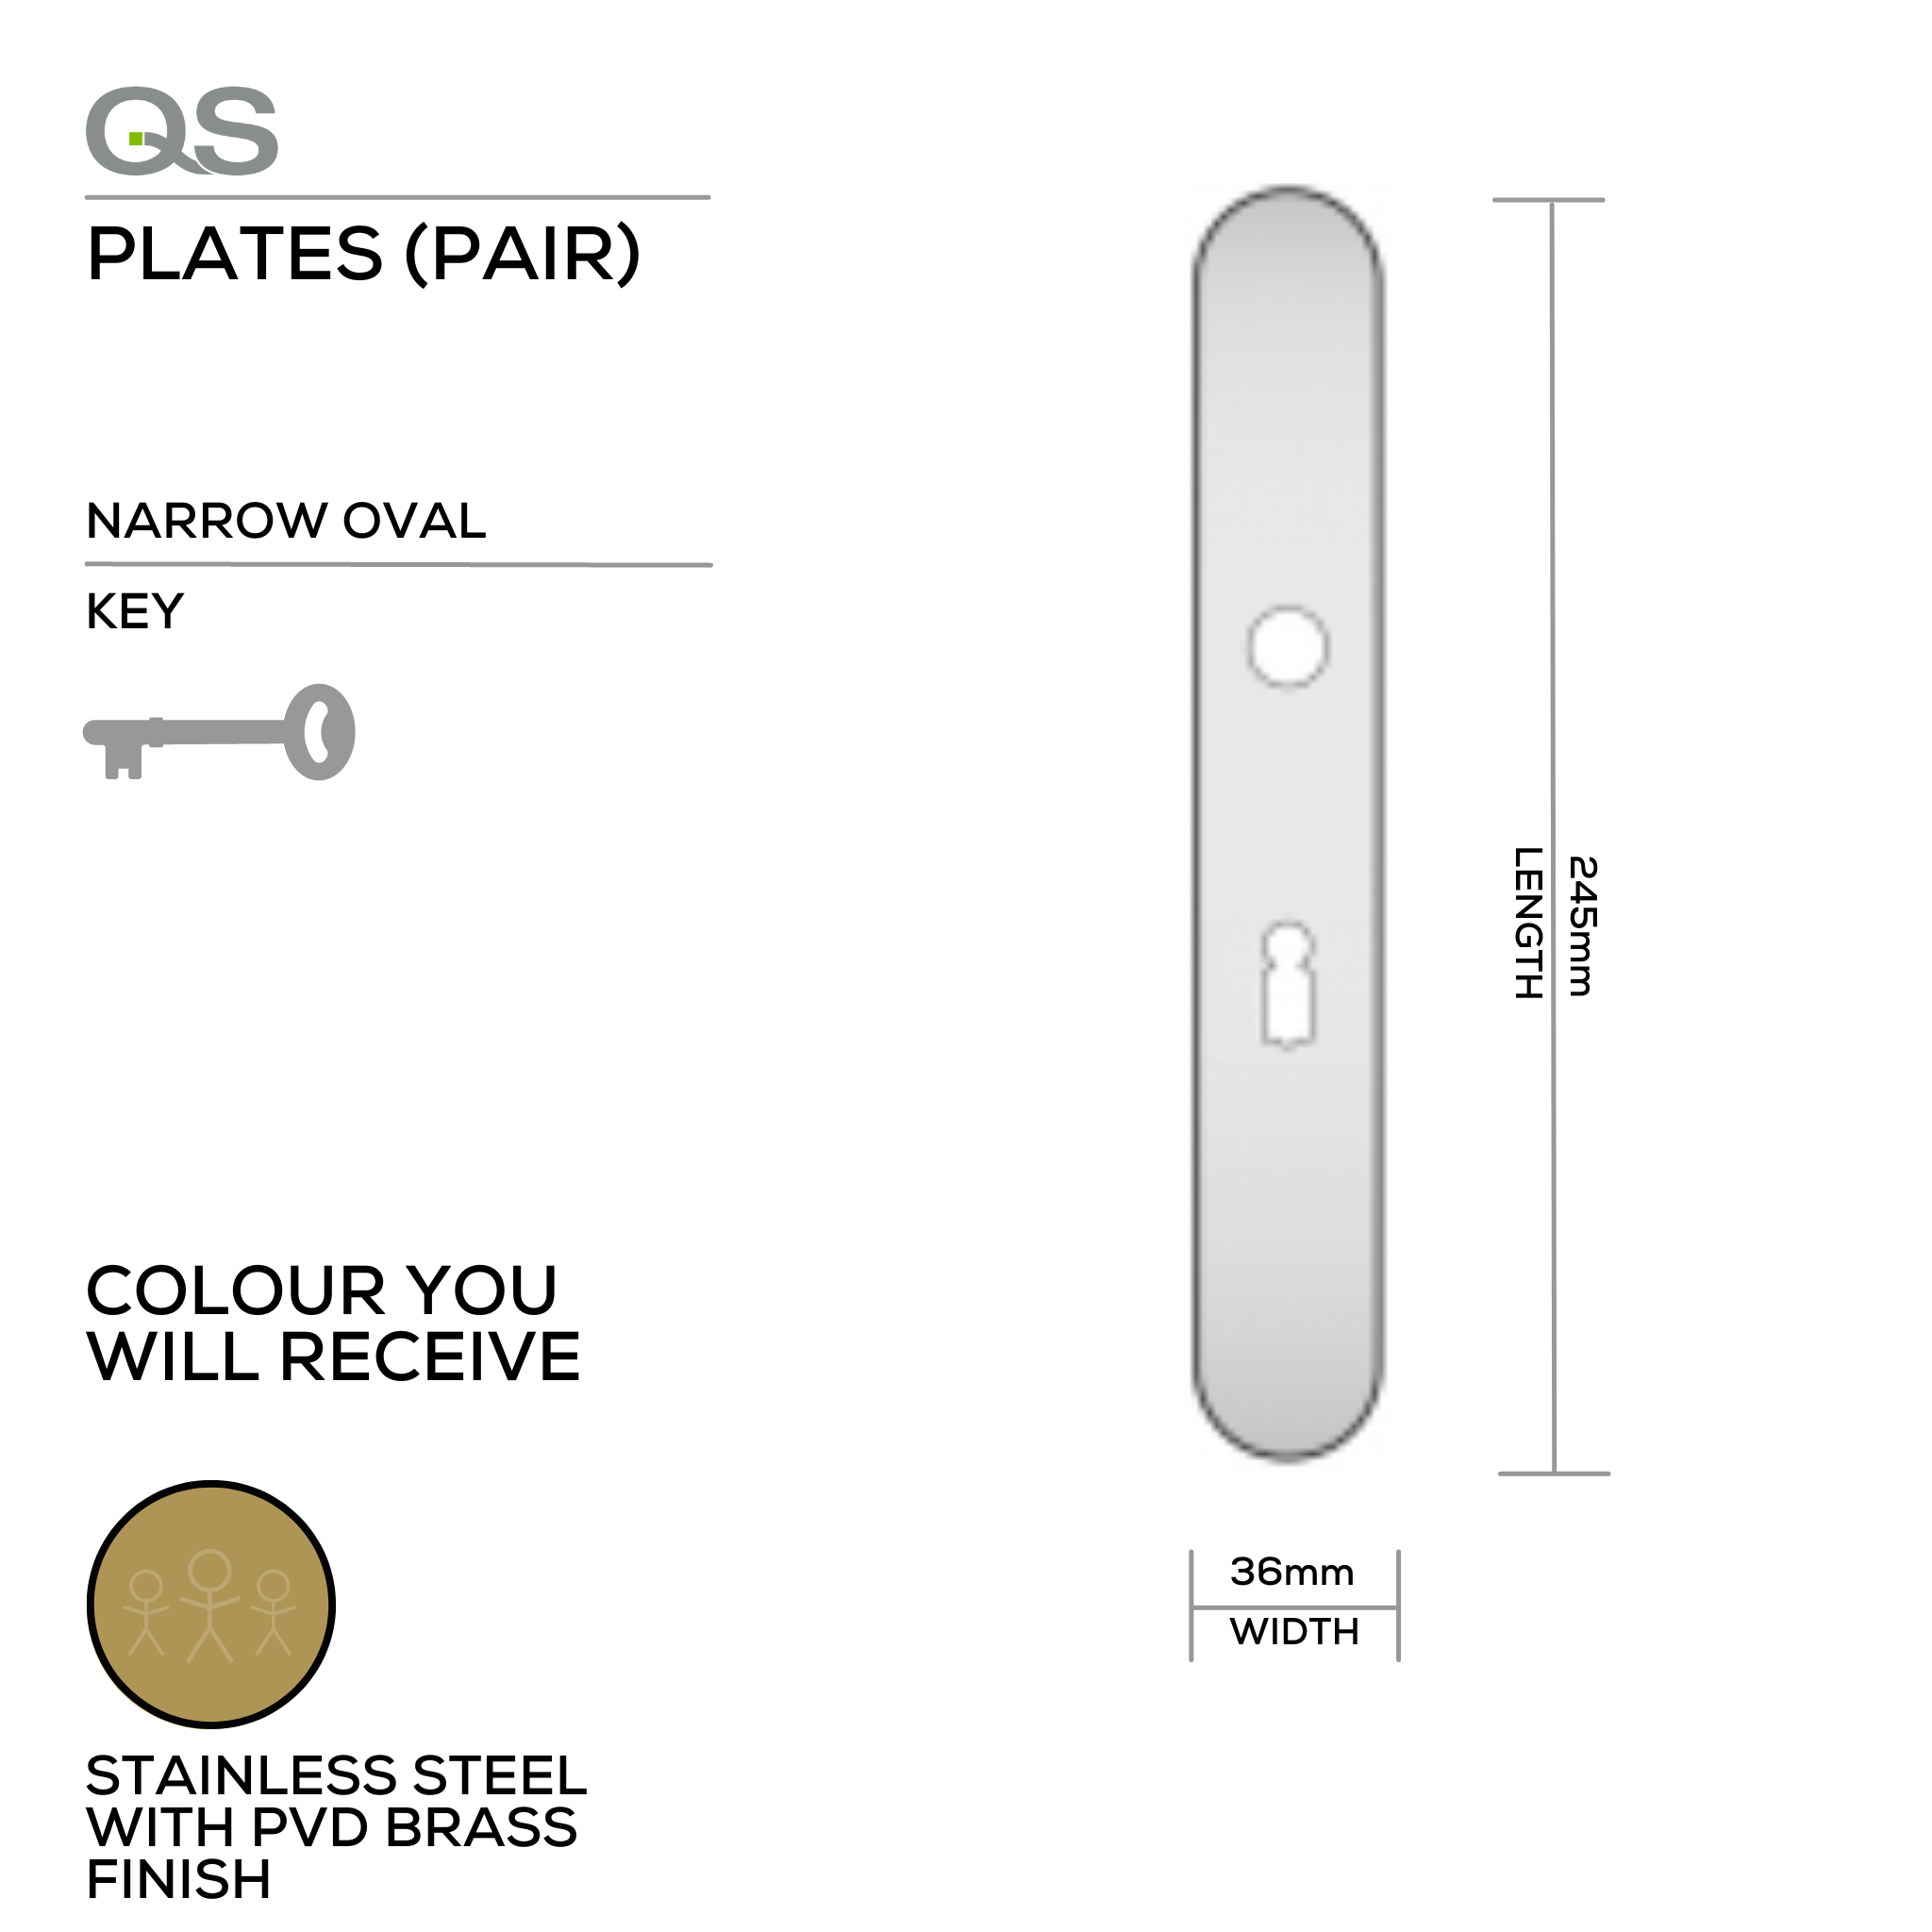 QS4483 PVD KH, Plate, Keyhole, Narrow Oval, Supplied with QS Handle, PVD Brass, QS